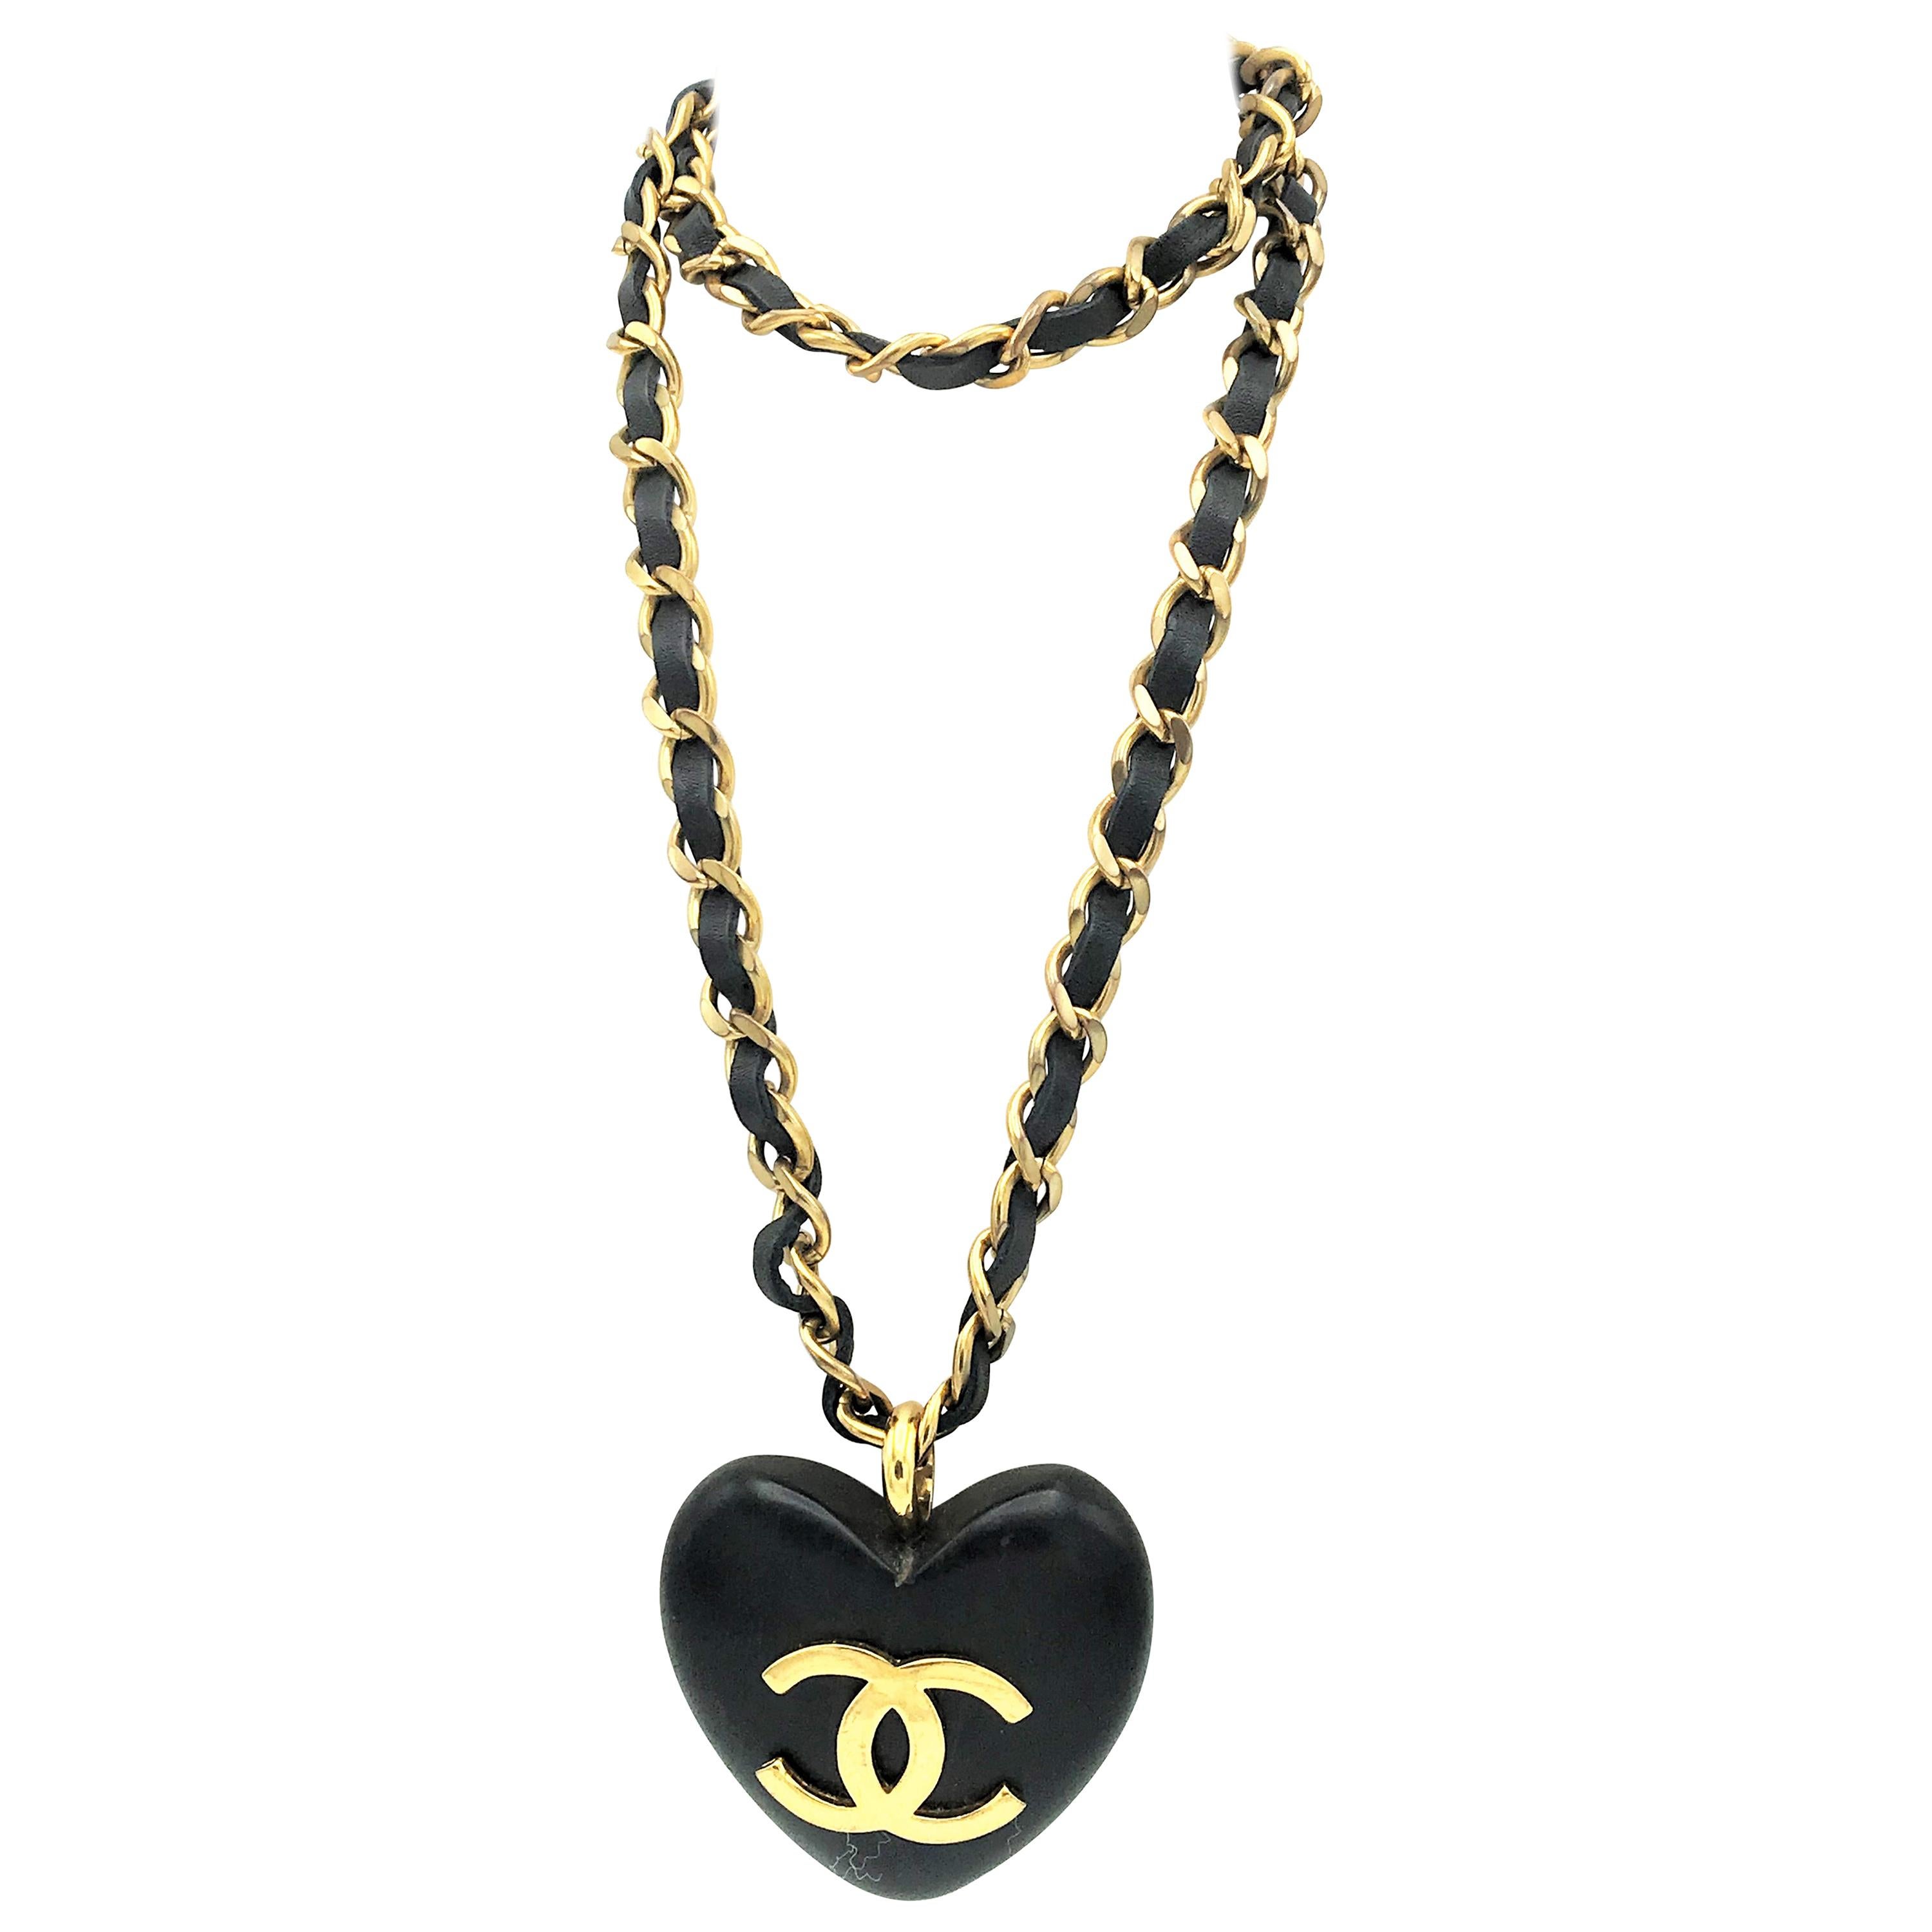 An Ebony Heart hangs on the iconic Chanel chain with leather sign